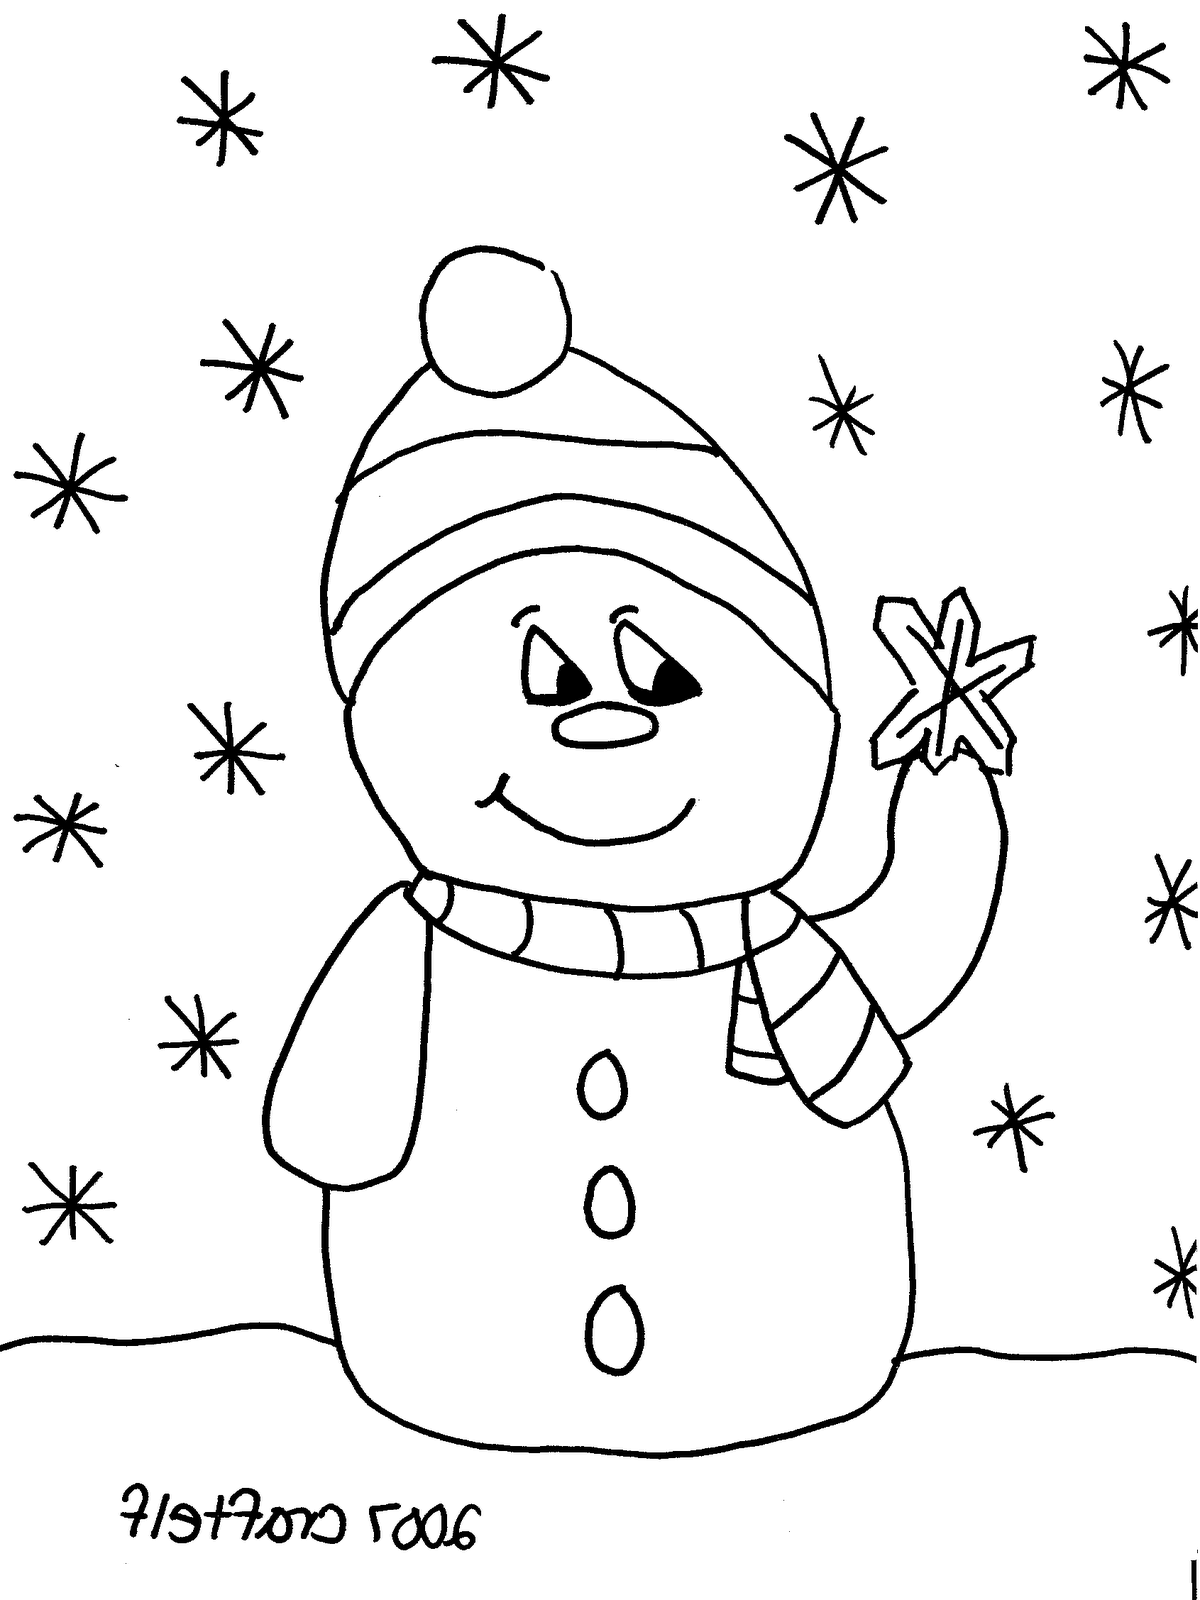 Free Pribtable Christmas Coloring Pages